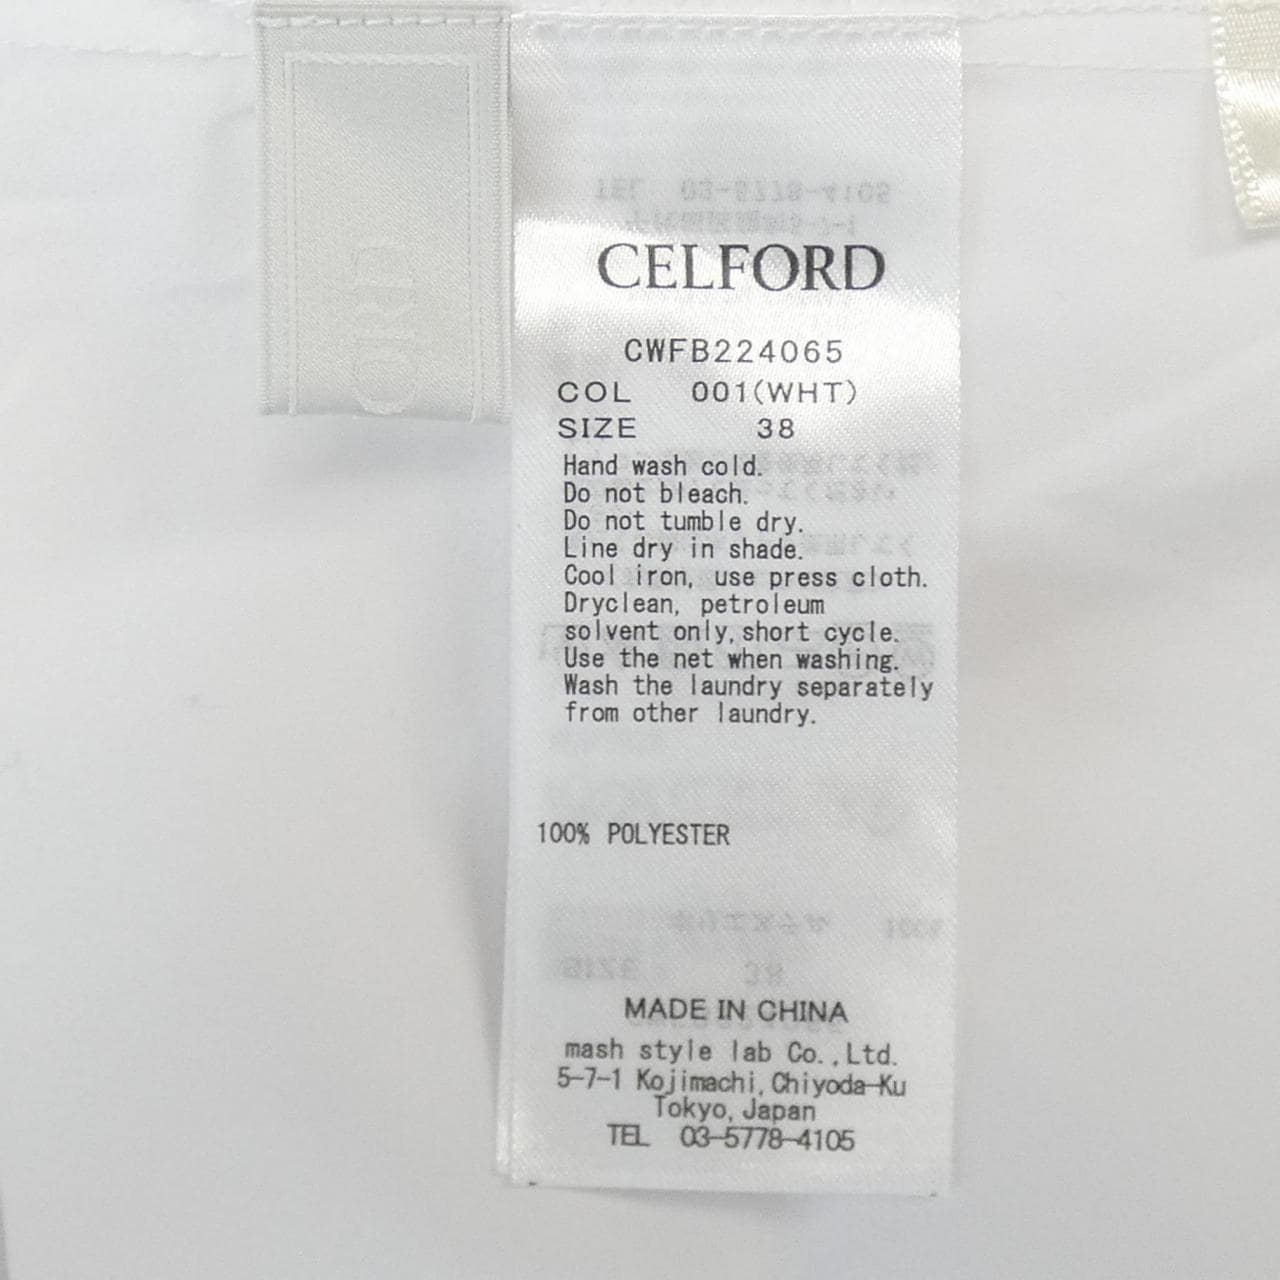 CELFORD tops